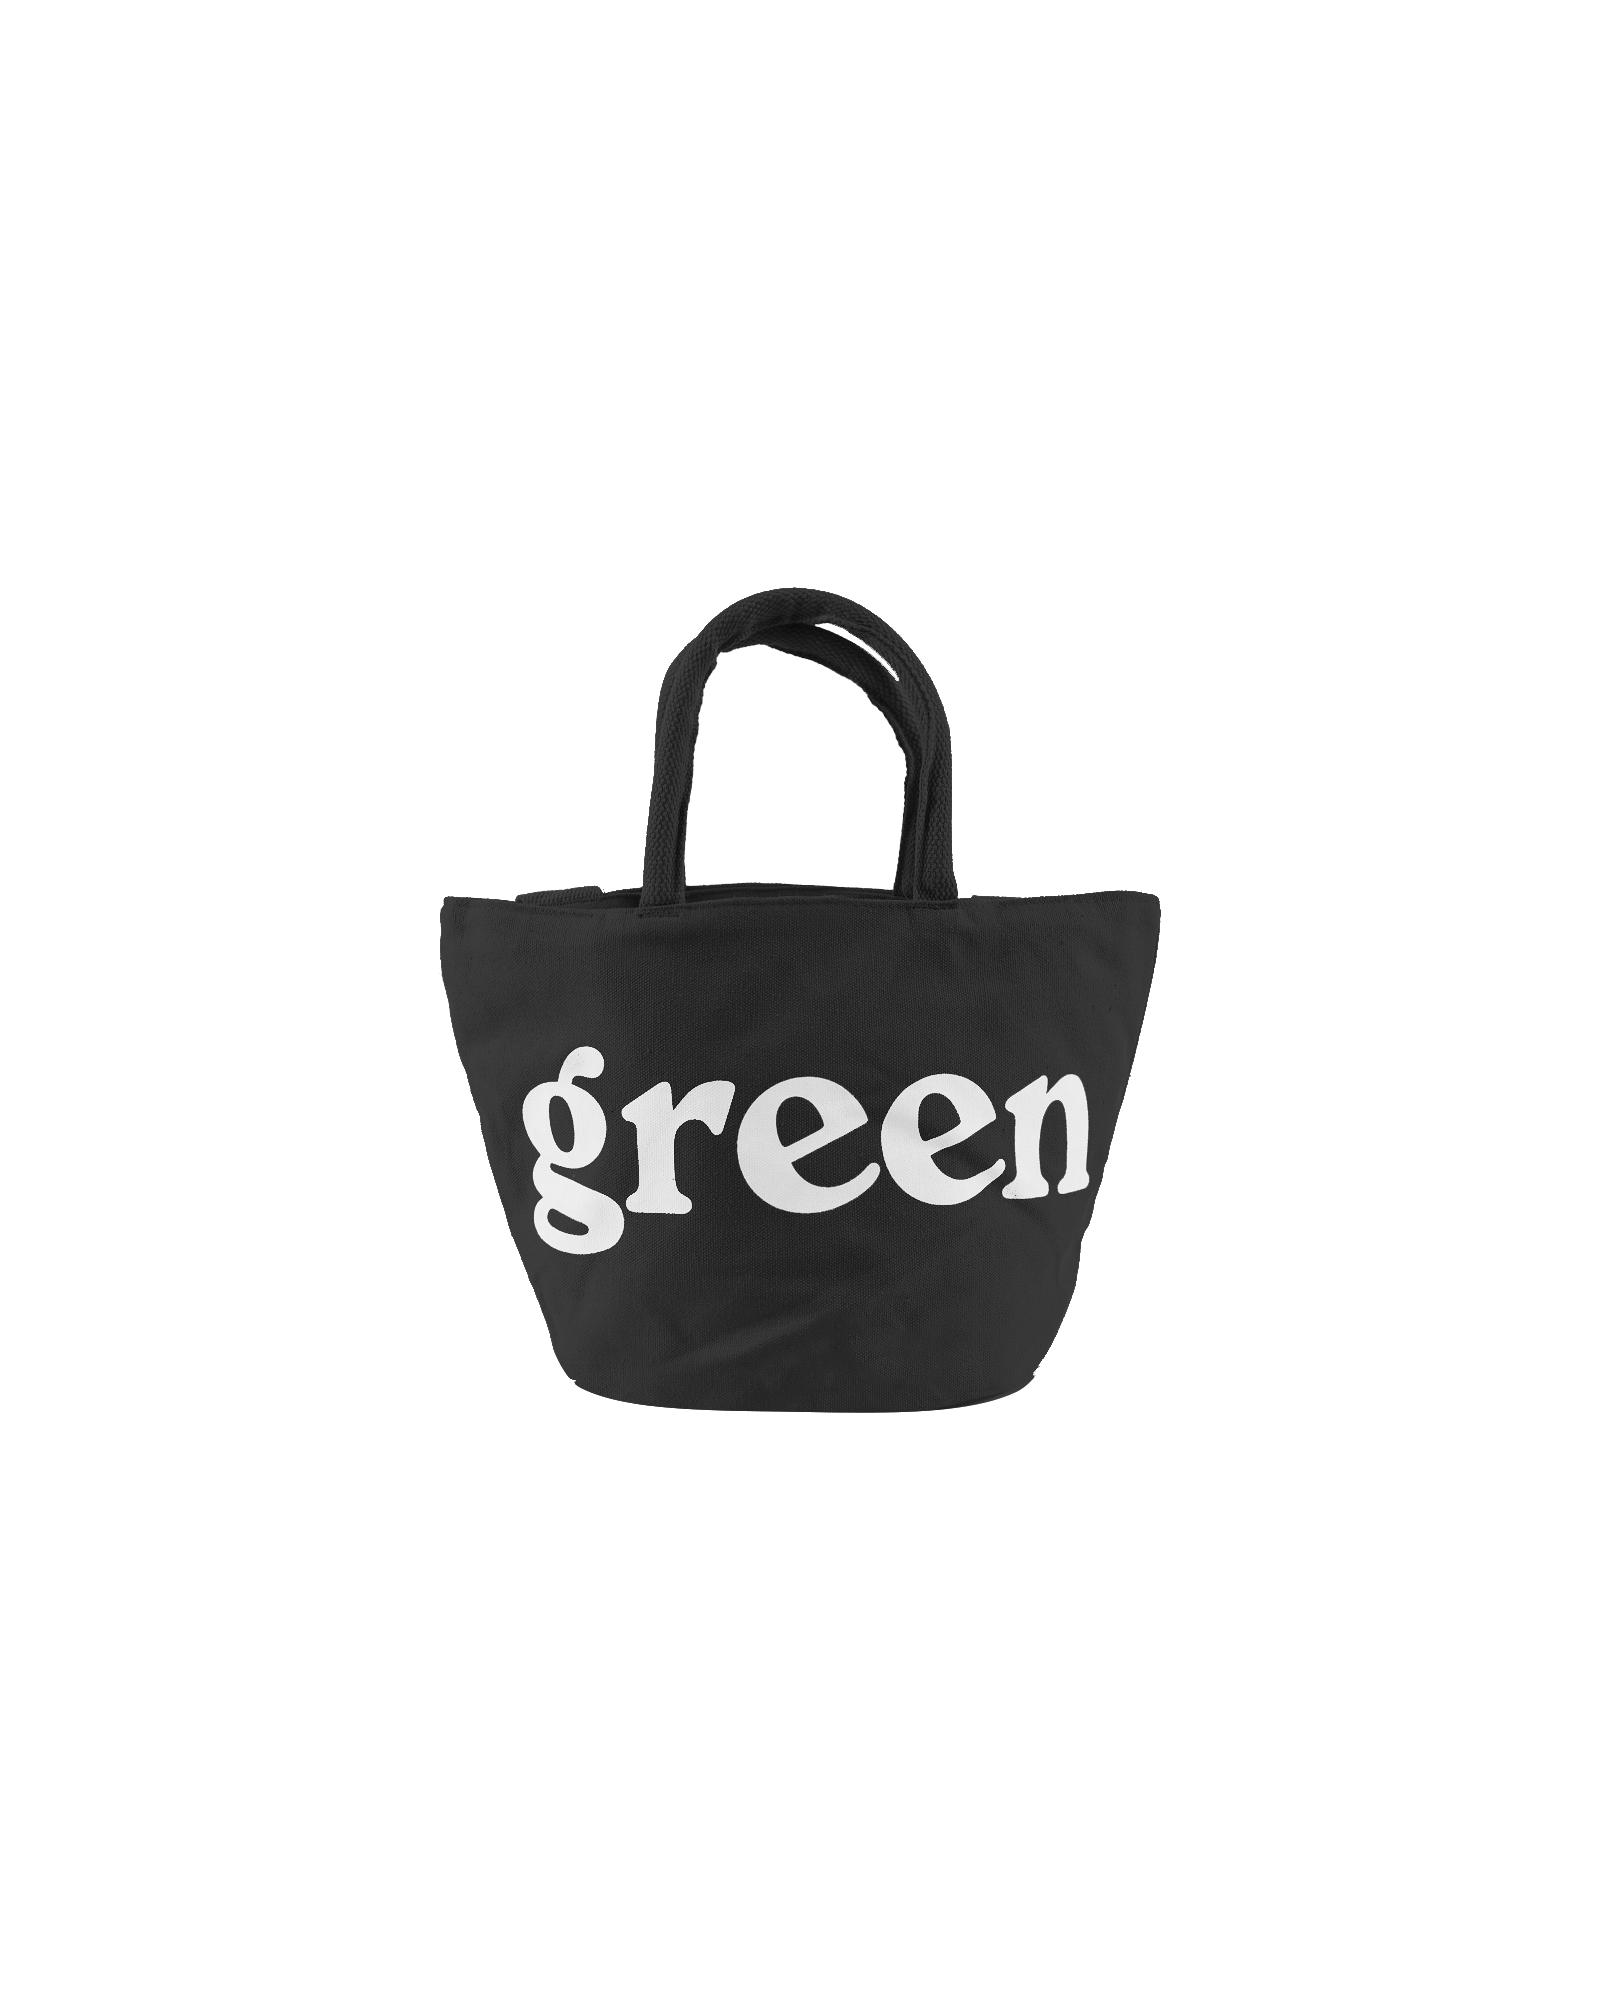 Mister Green - Accessory - Small Grow Bag/Tote - V2 - Black